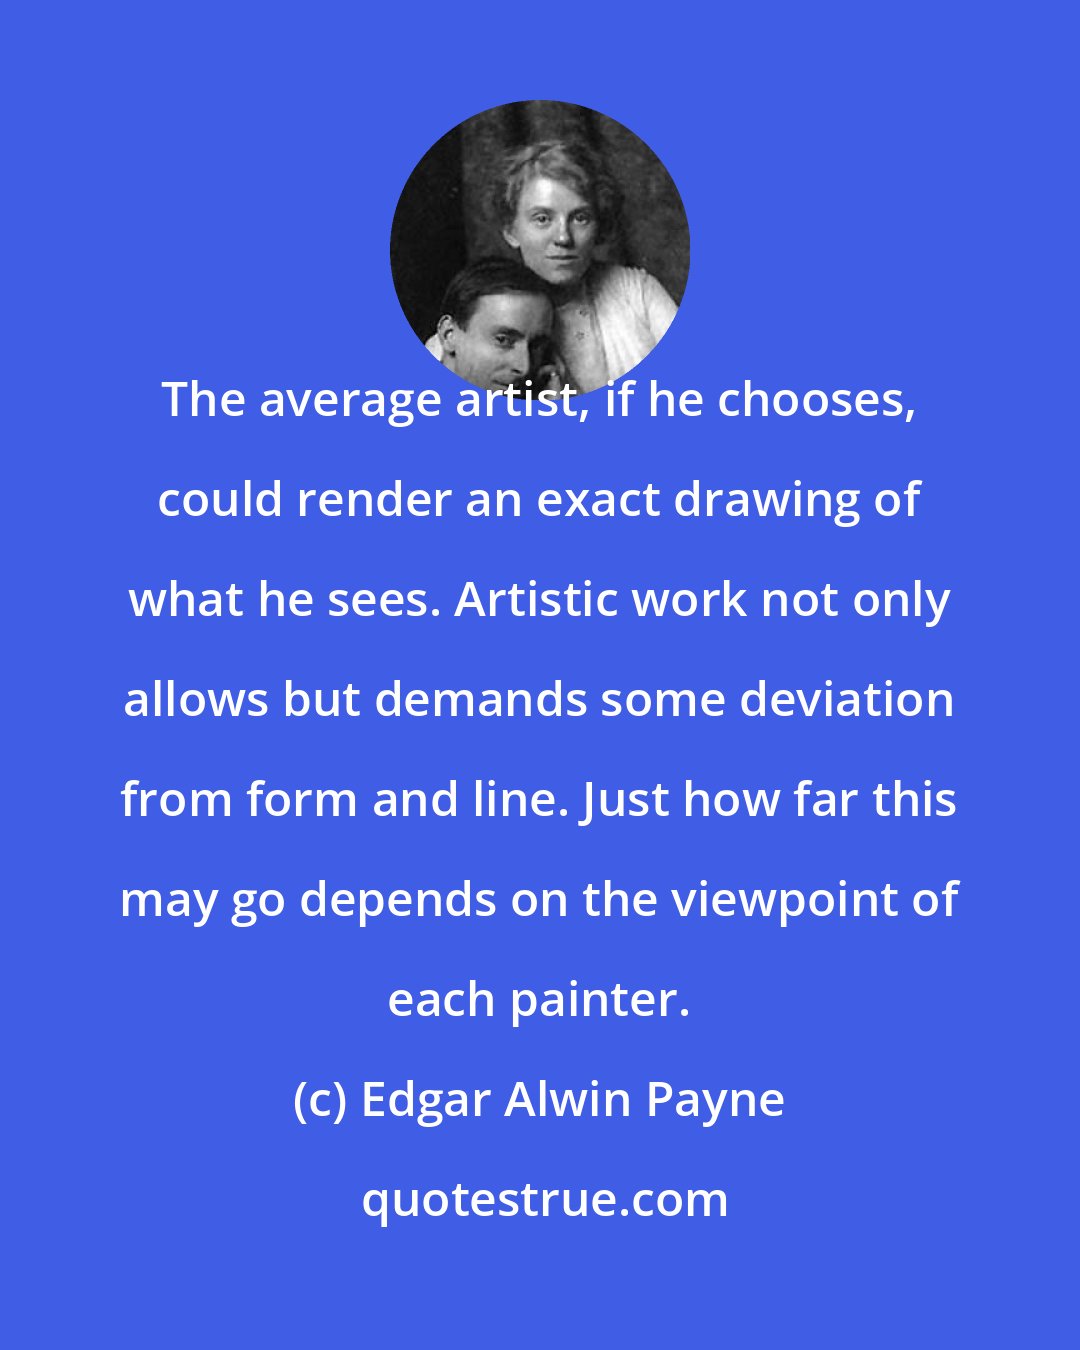 Edgar Alwin Payne: The average artist, if he chooses, could render an exact drawing of what he sees. Artistic work not only allows but demands some deviation from form and line. Just how far this may go depends on the viewpoint of each painter.